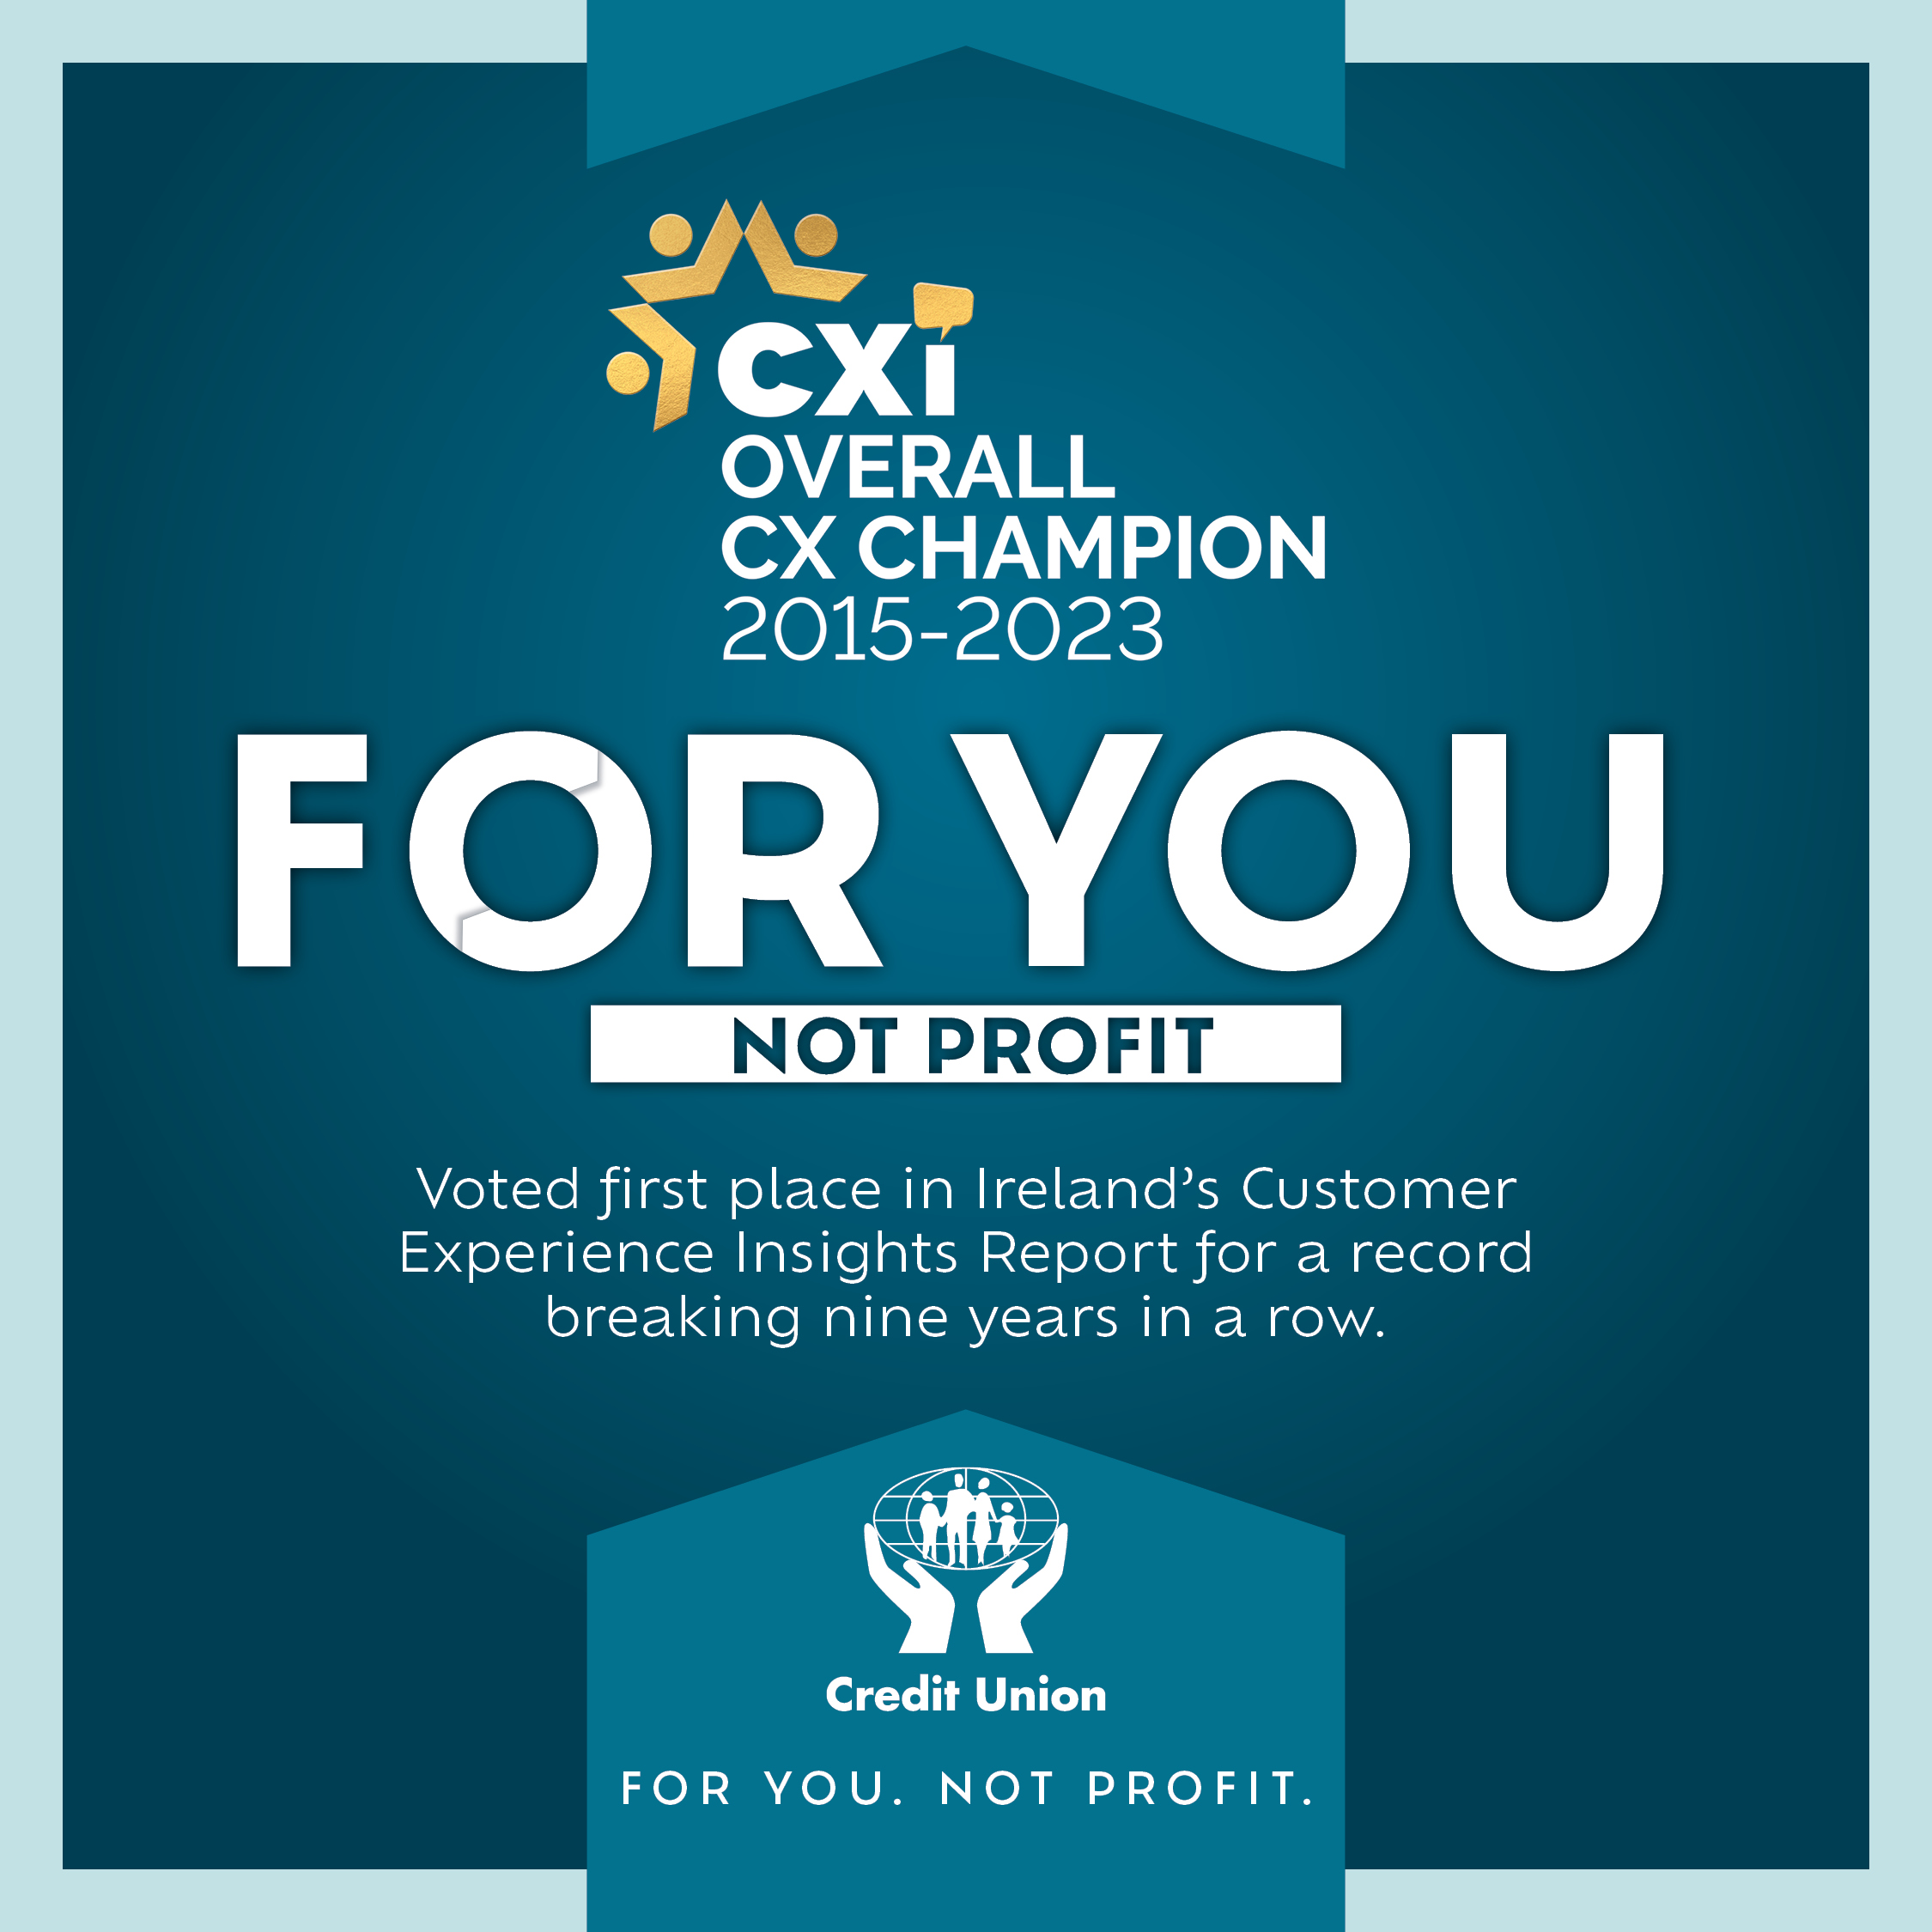 Credit Unions named champions for Customer Experience for unprecedented 9th consecutive year